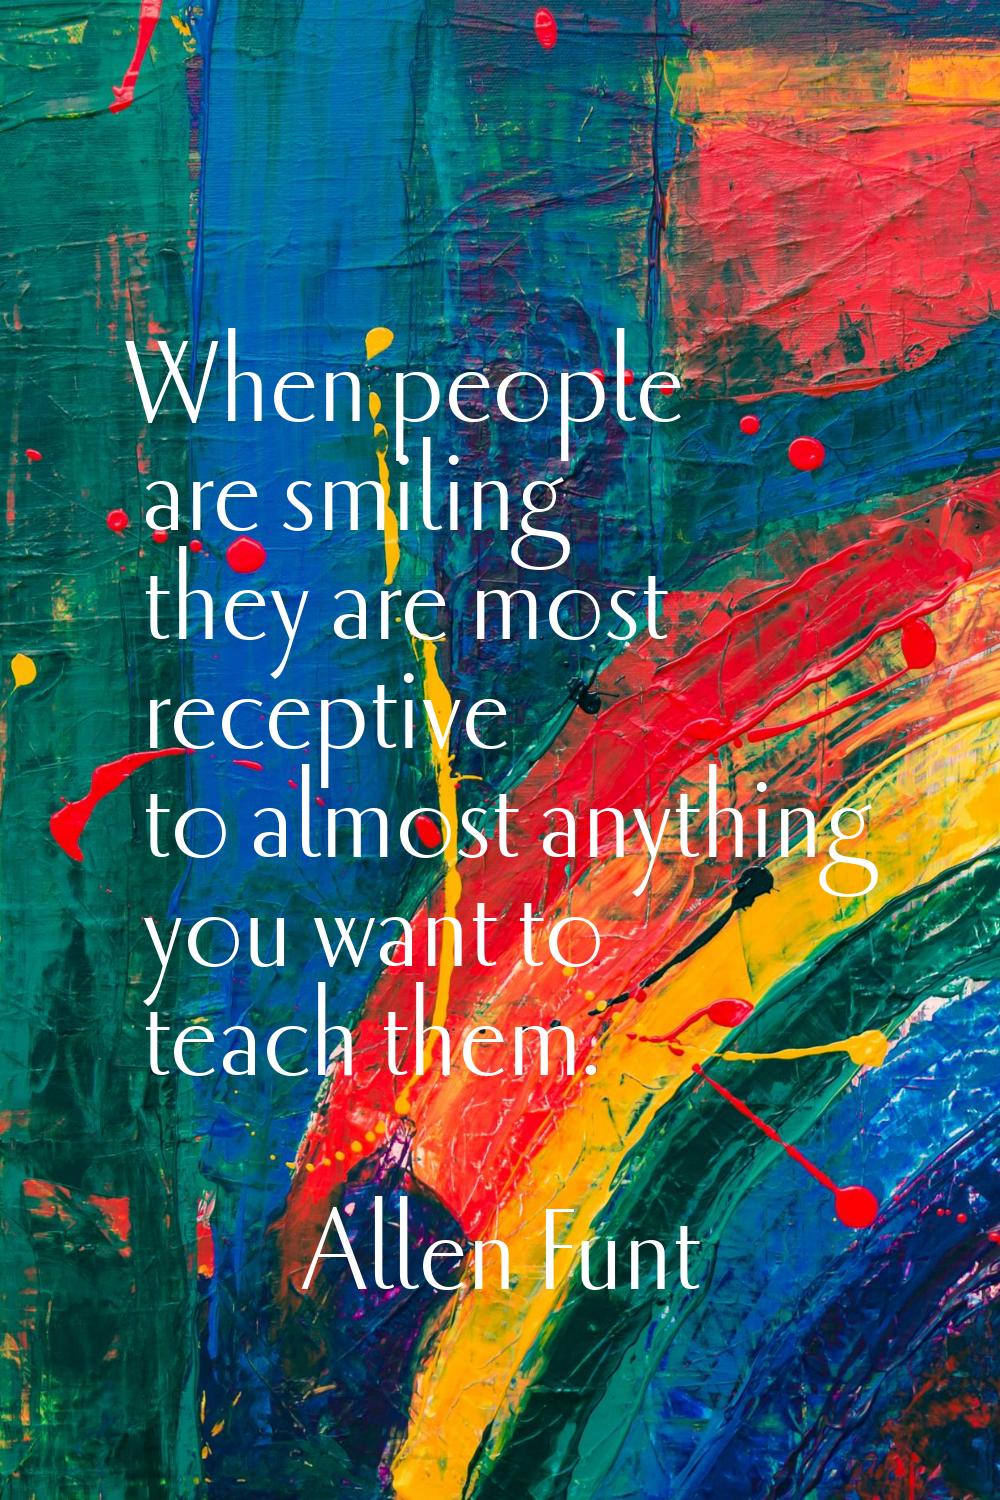 When people are smiling they are most receptive to almost anything you want to teach them.